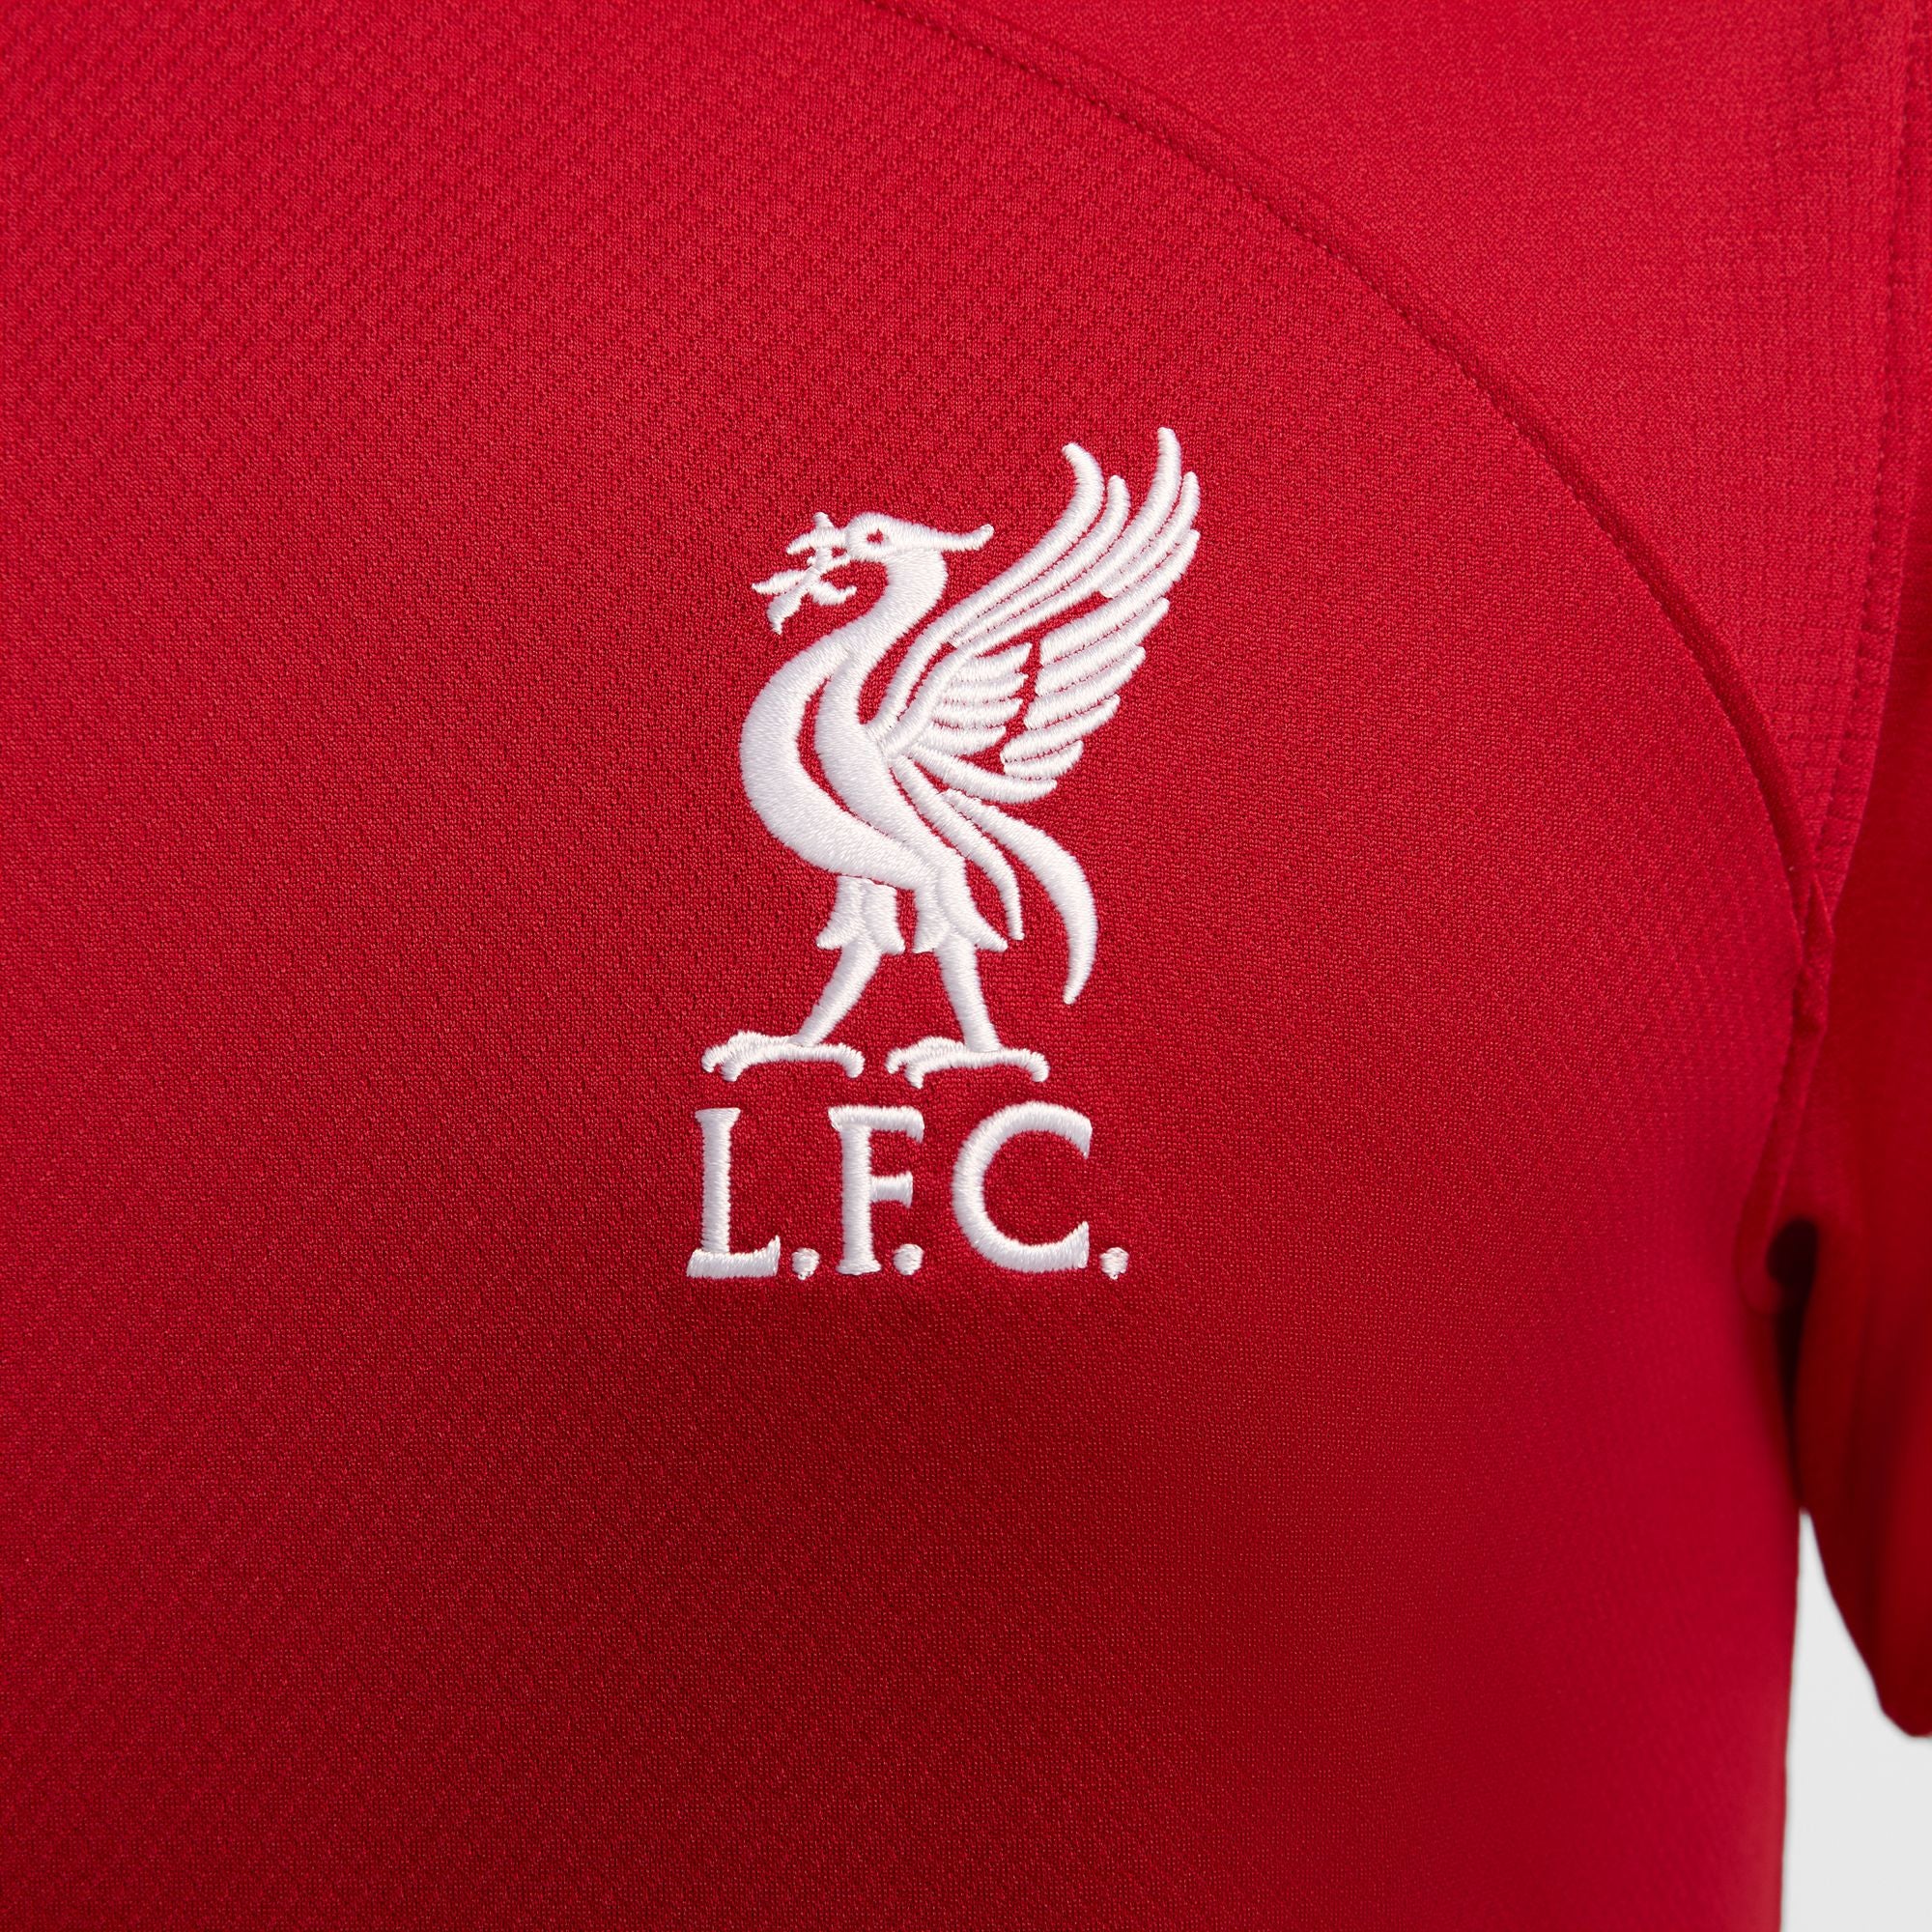 Nike Liverpool Home Jersey 23/24 - DX2692-688